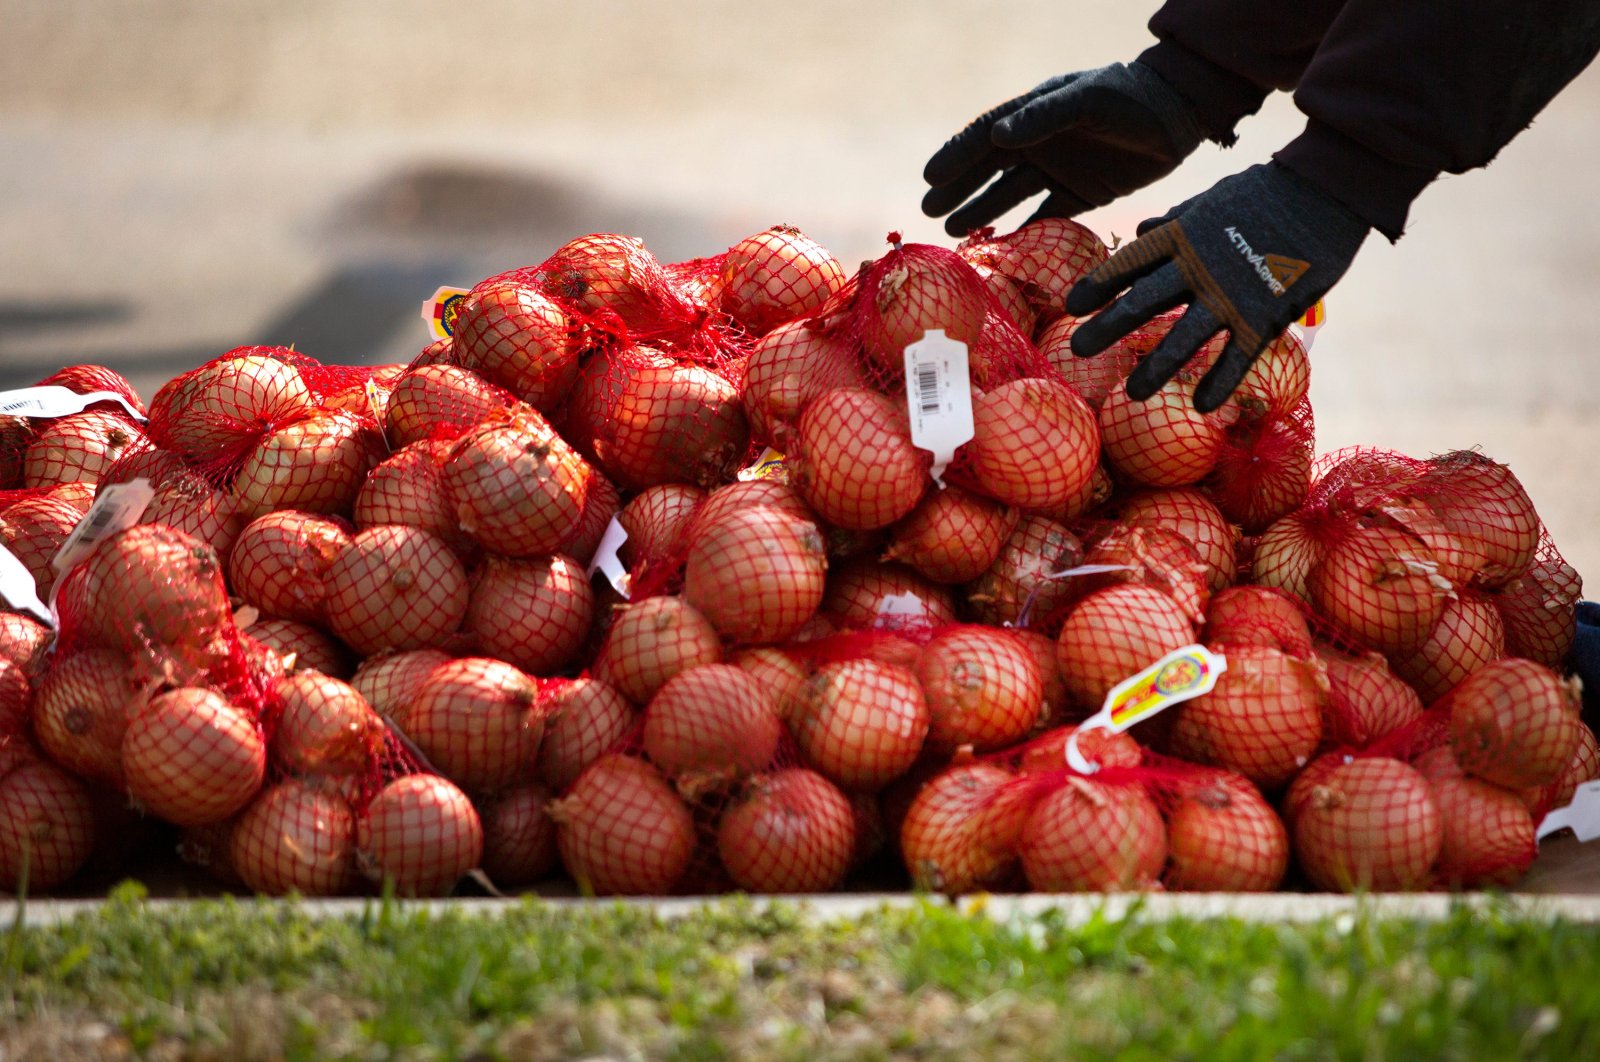 Mike Probst moves onions from a Loffredo Fresh Foods truck on April 15, 2020 in Des Moines. (Reuters Photo)